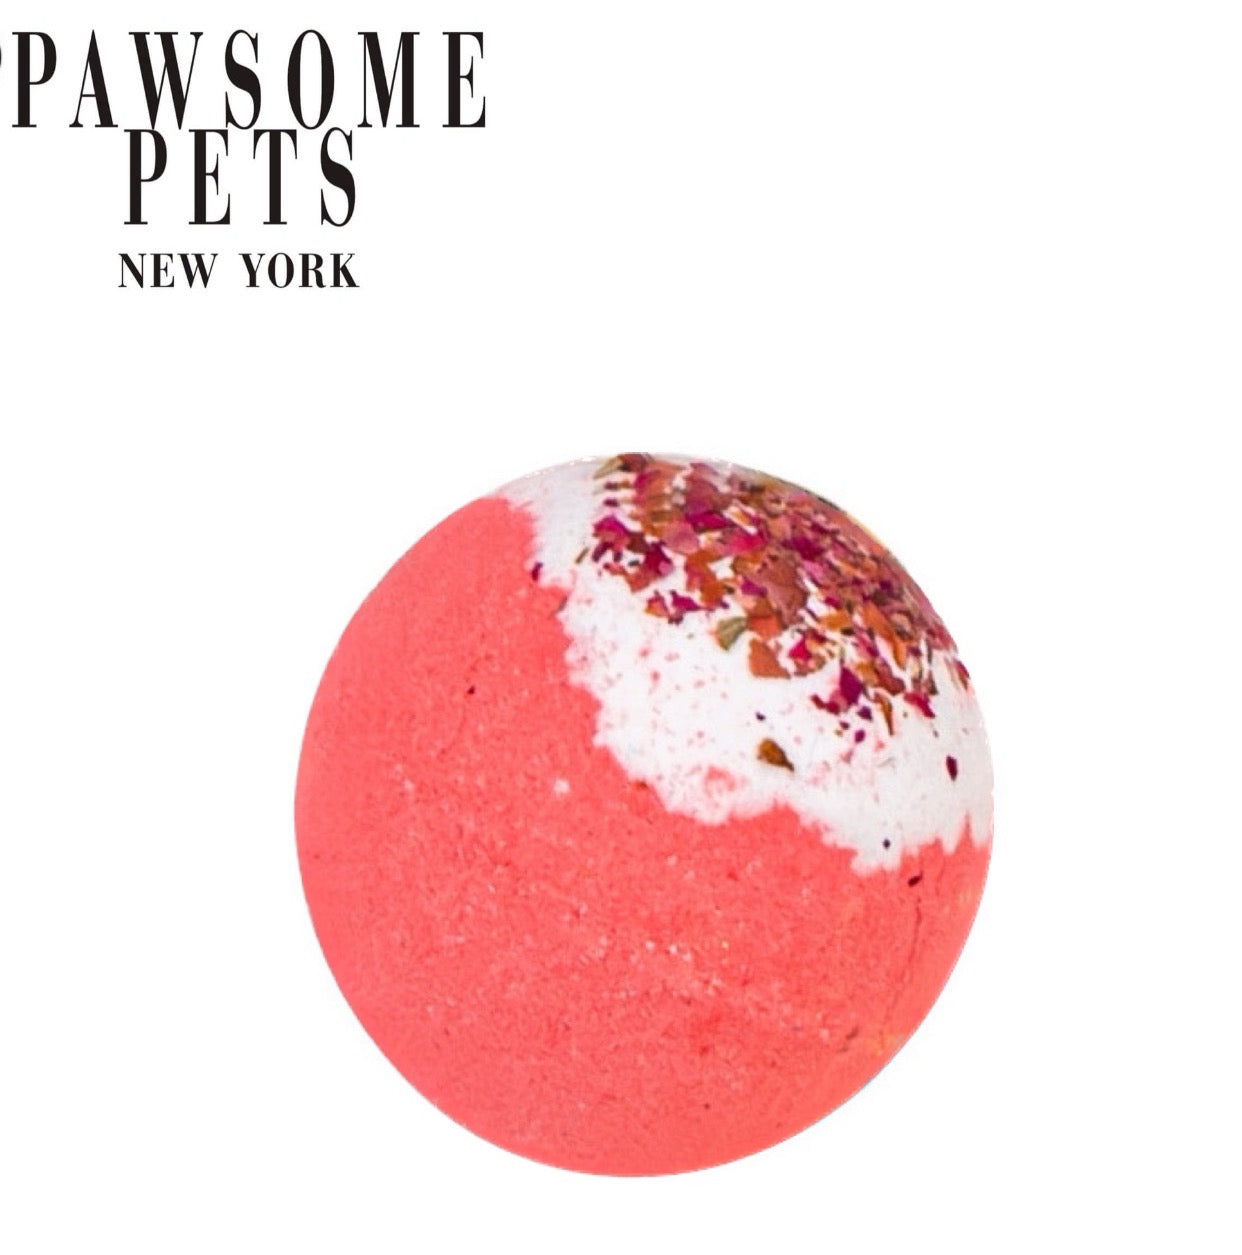 BATH BOMBS FOR DOGS - DRY ROSE